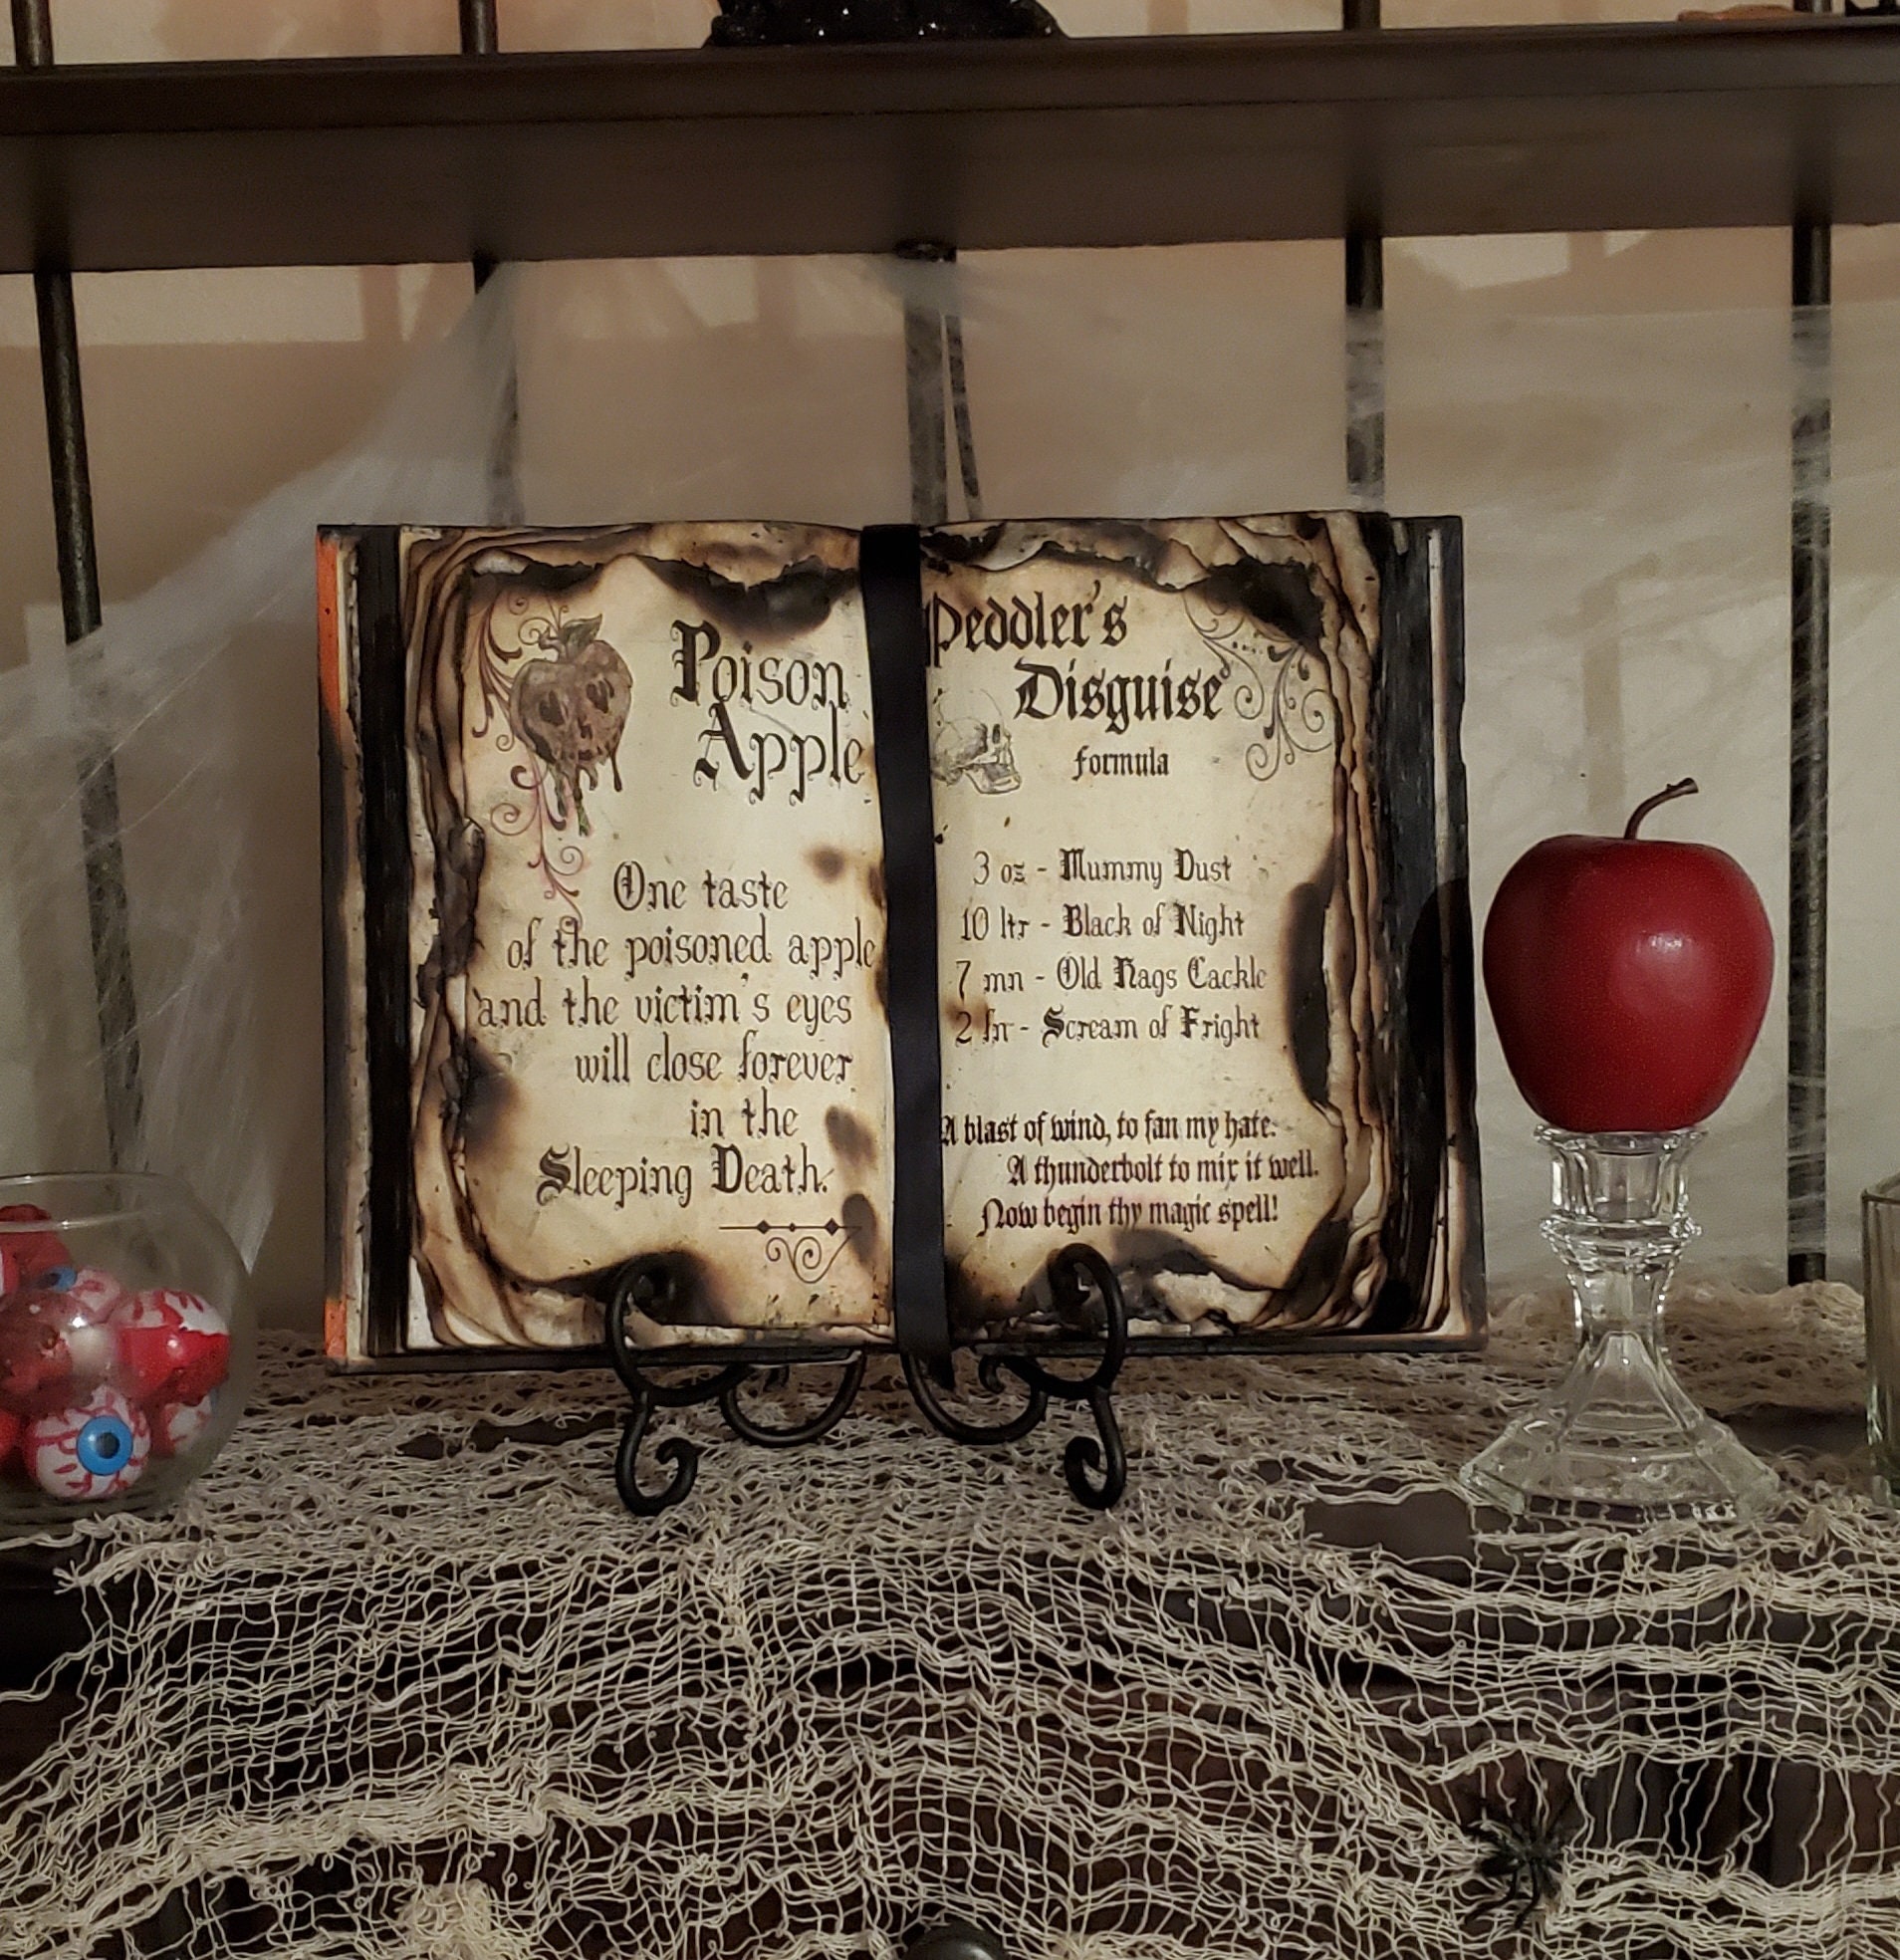 Witches Spell Book aged printed book pages, Halloween Prop by Dead Head  Props